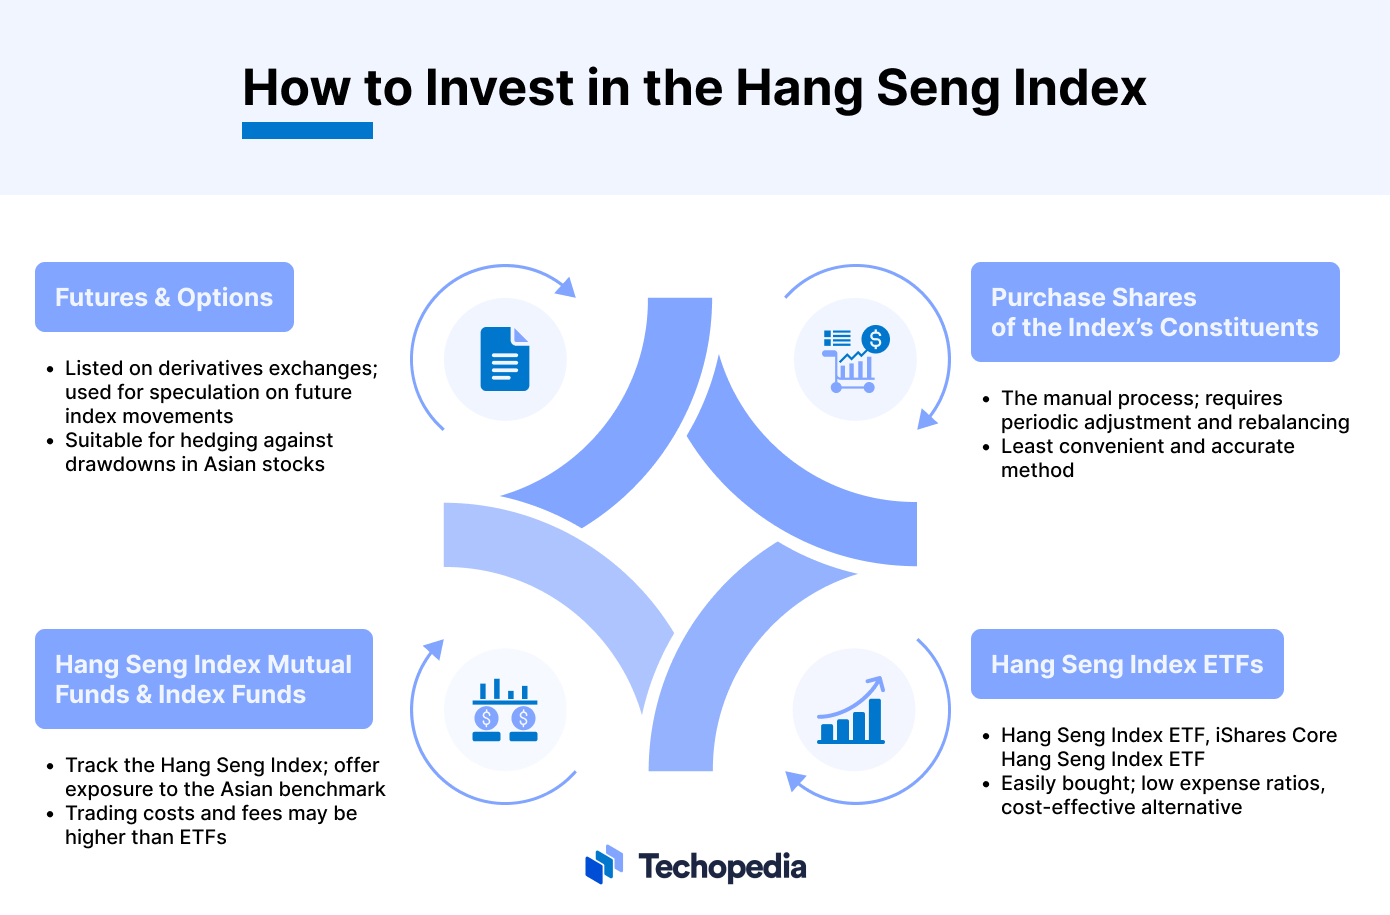 How to Invest in the Hang Seng Index